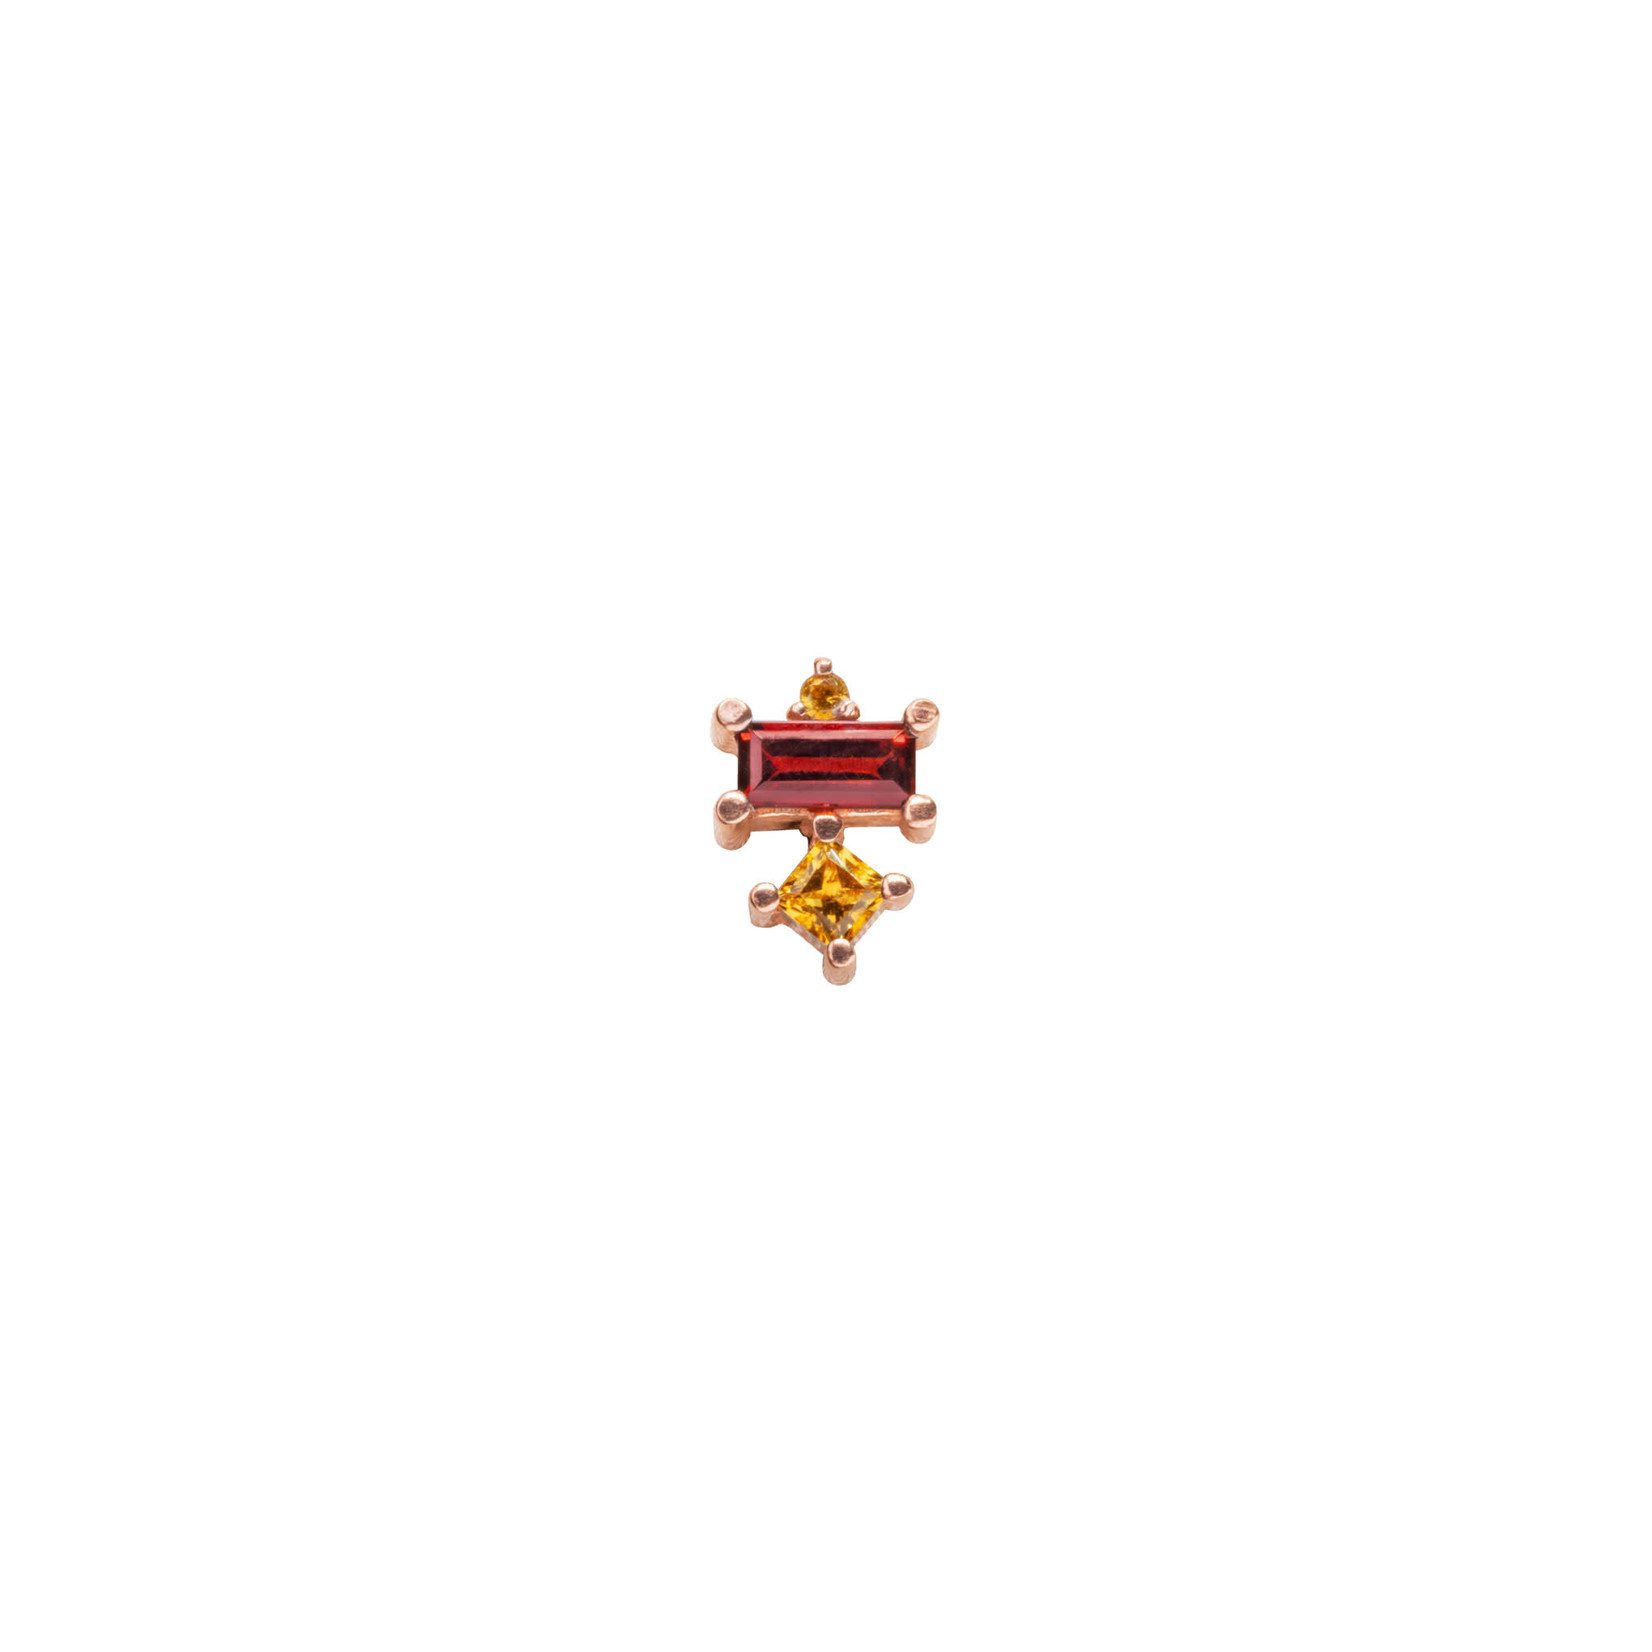 BVLA BVLA rose gold "Tetra" threaded end with 1.0 AA citrine, 4x2 AA garnet baguette, and 2.0 princess cut AA citrine